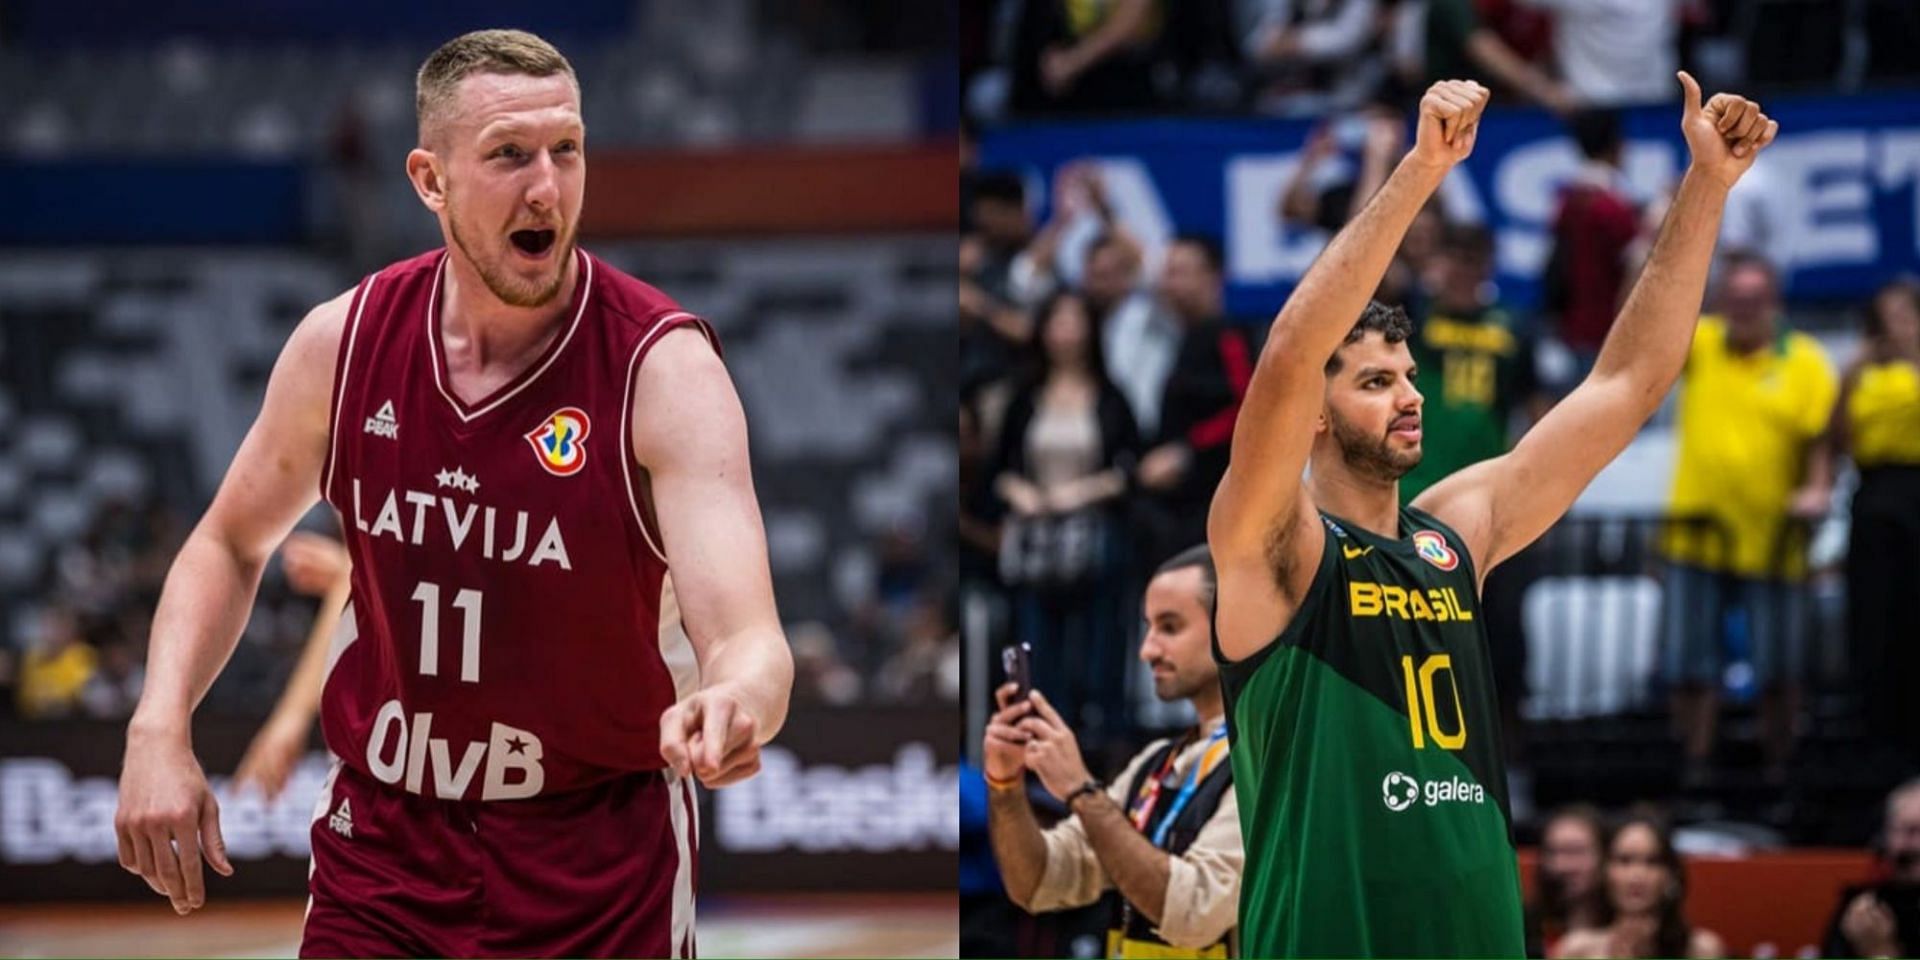 Brazil vs Latvia FIBA World Cup 2023 Date, time, where to watch, live stream details, and more